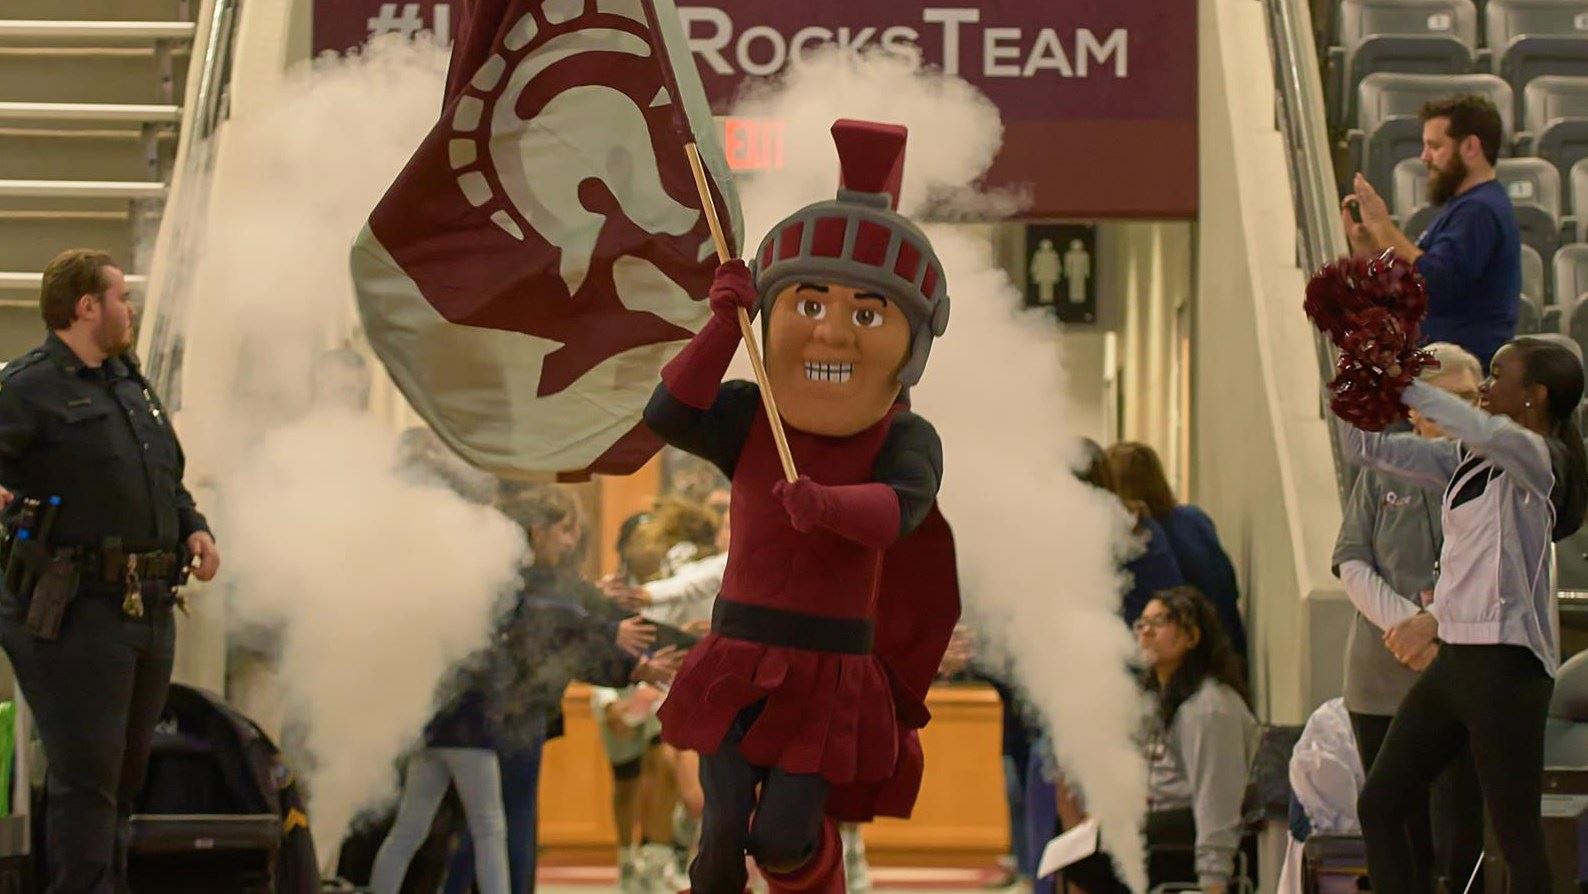 The Trojan mascot waves UA Little Rock's flag at the state of a basketball game.